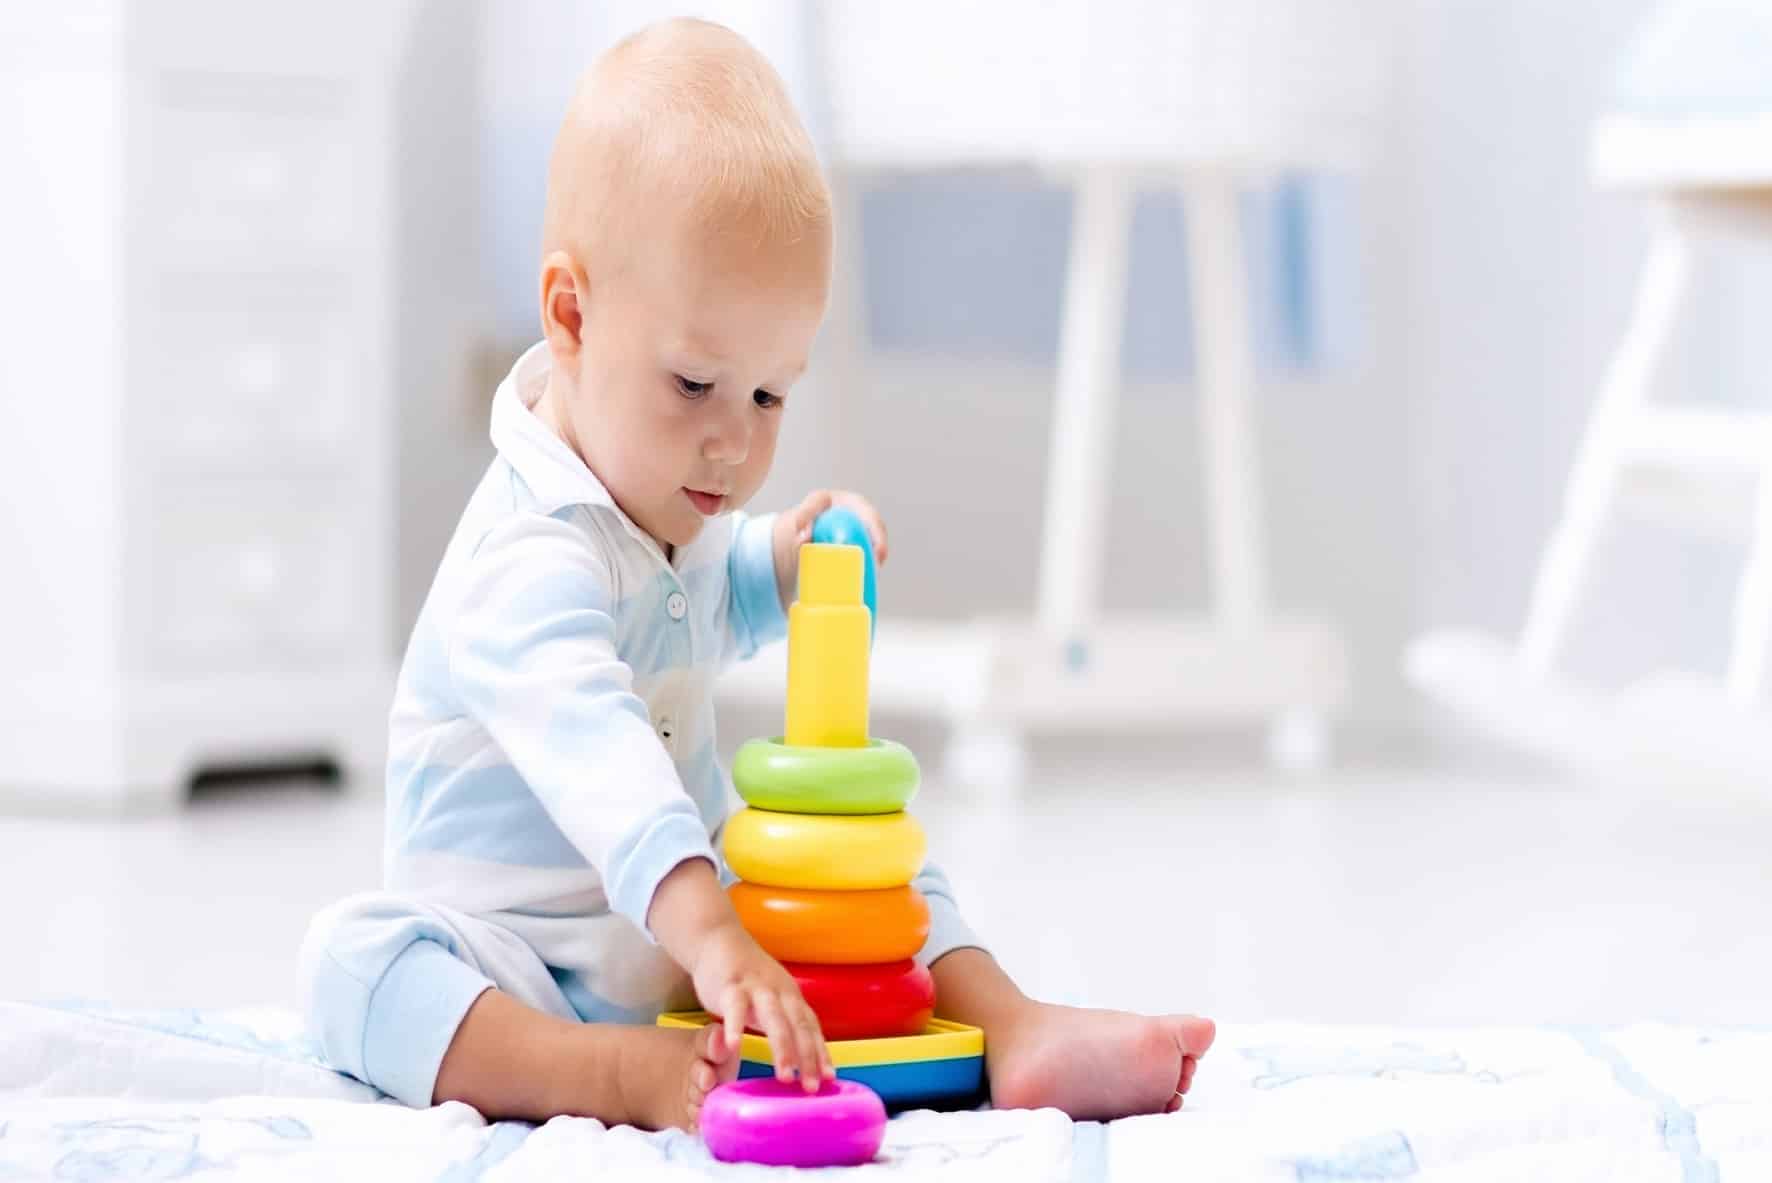 How to Sanitize Different Types of Baby Toys